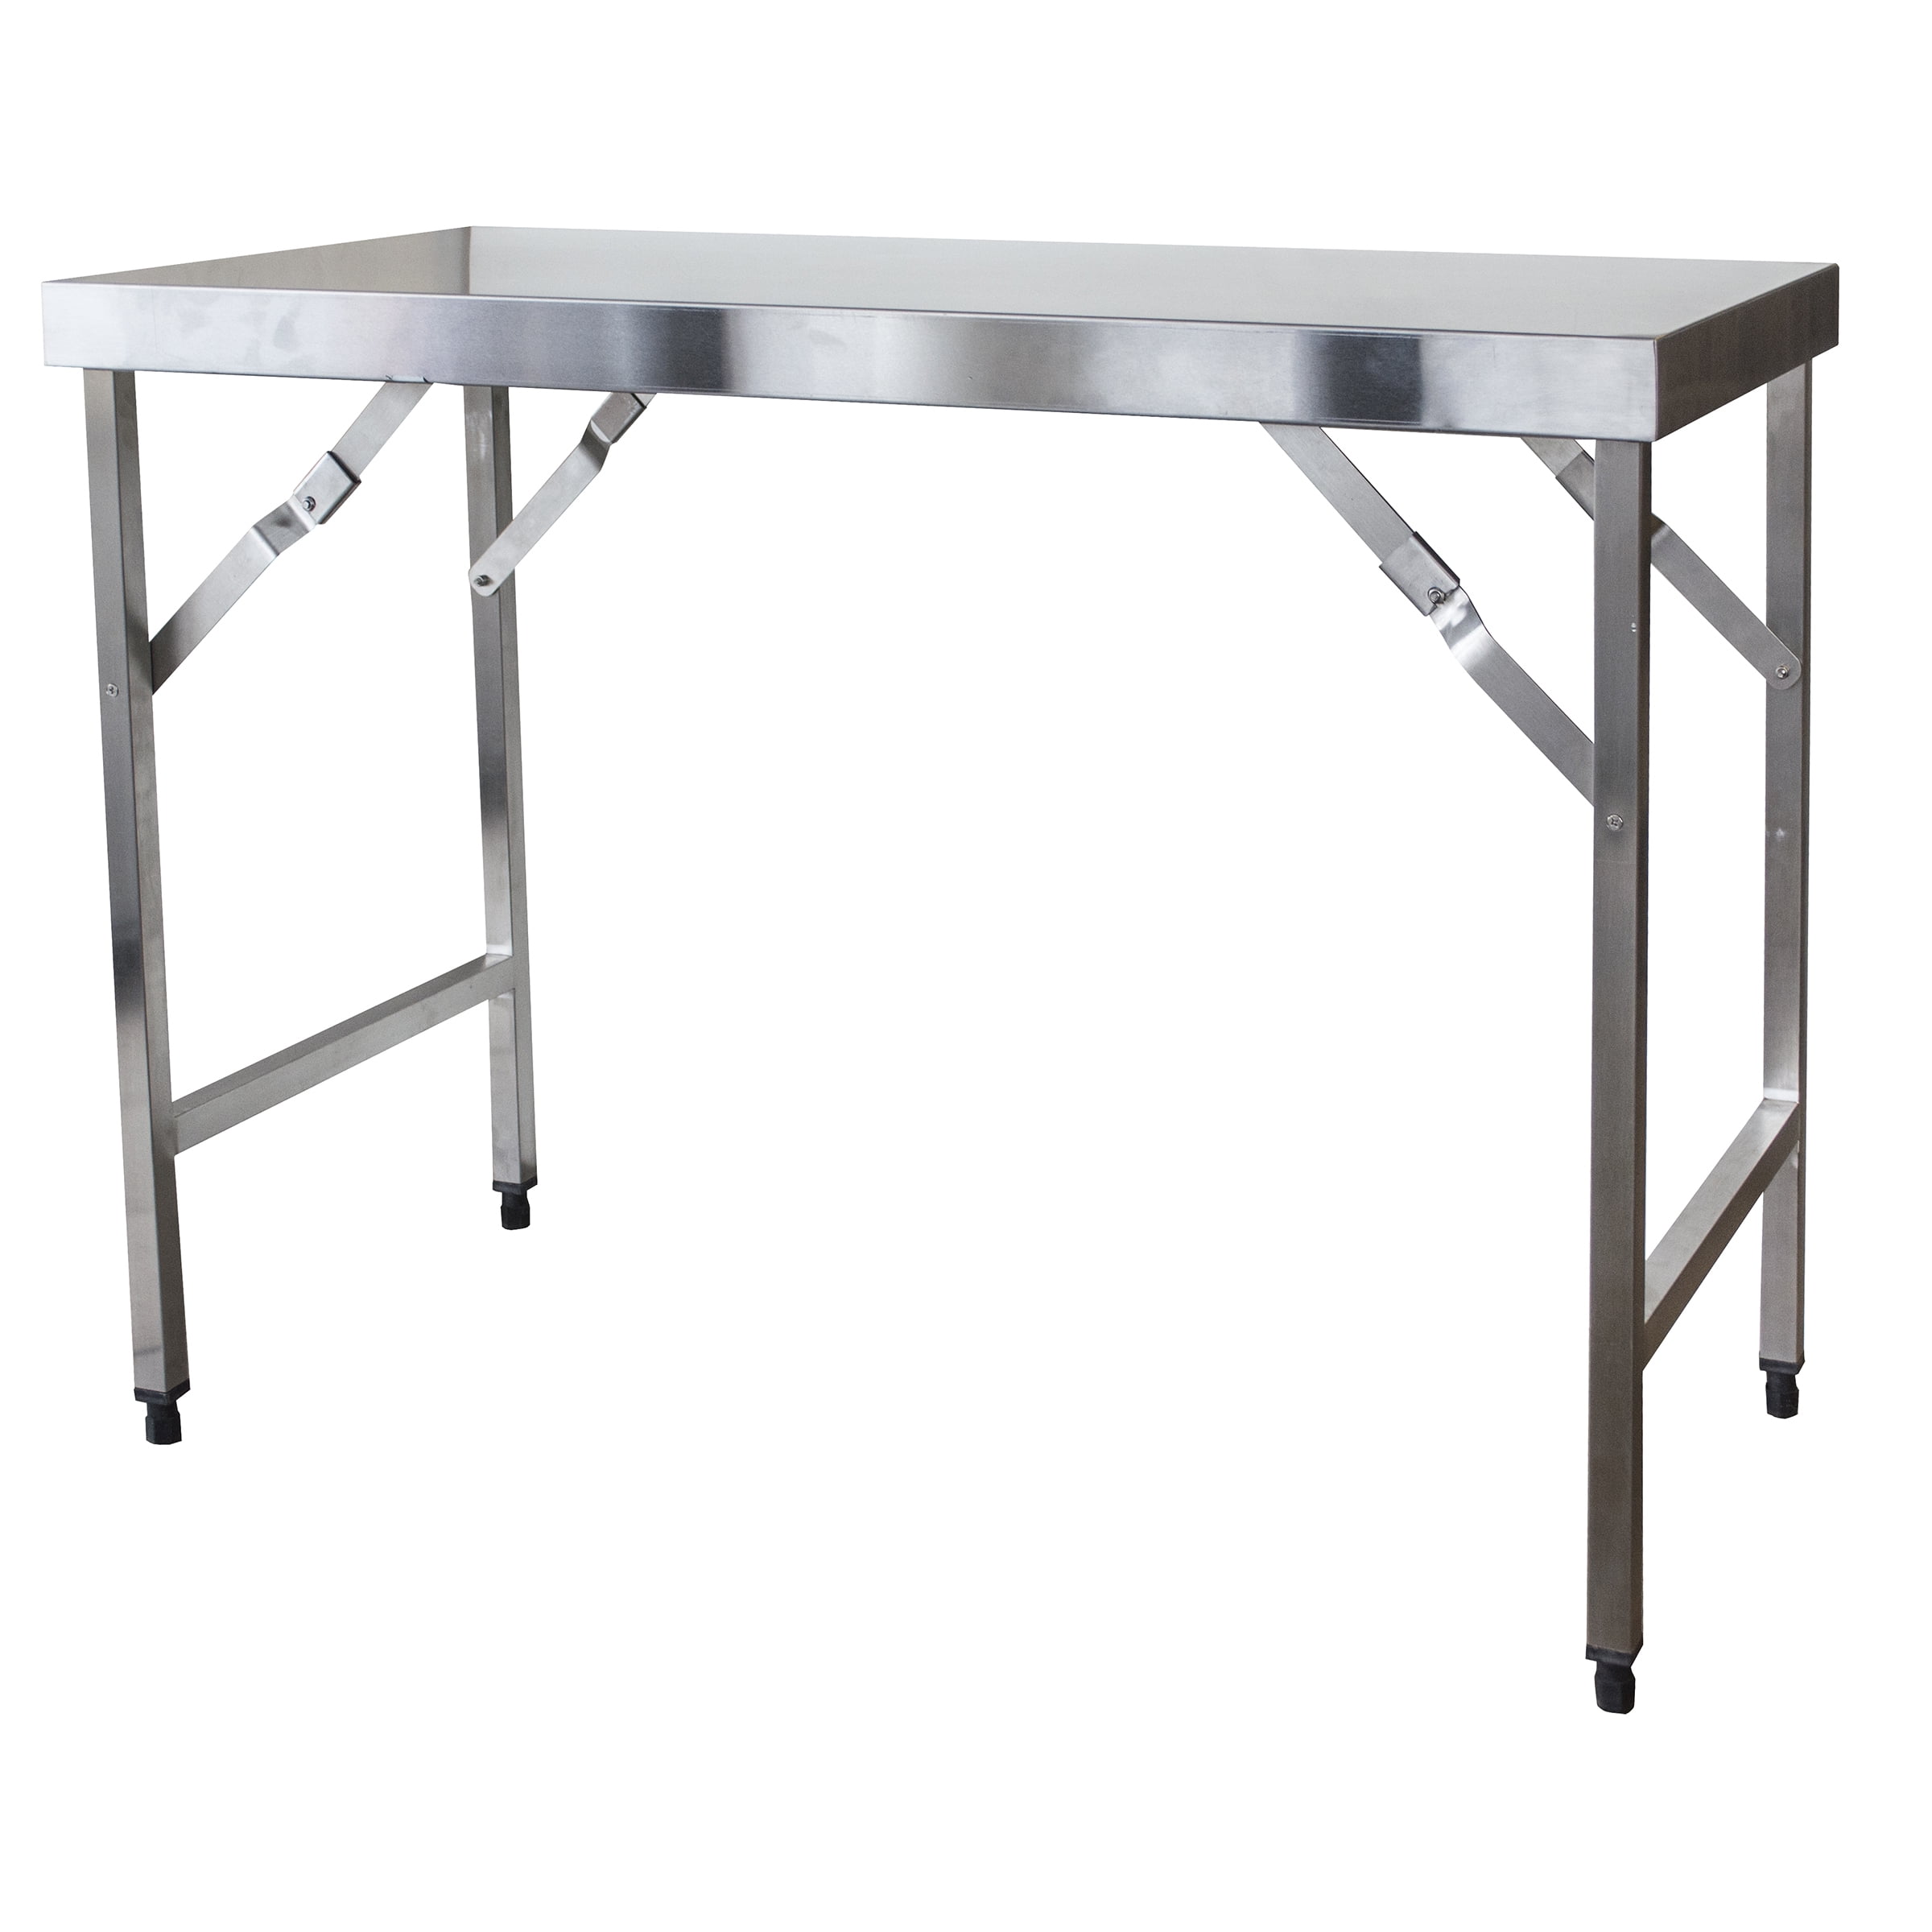 Fine-line Stainless Steel Portable Folding Work Table